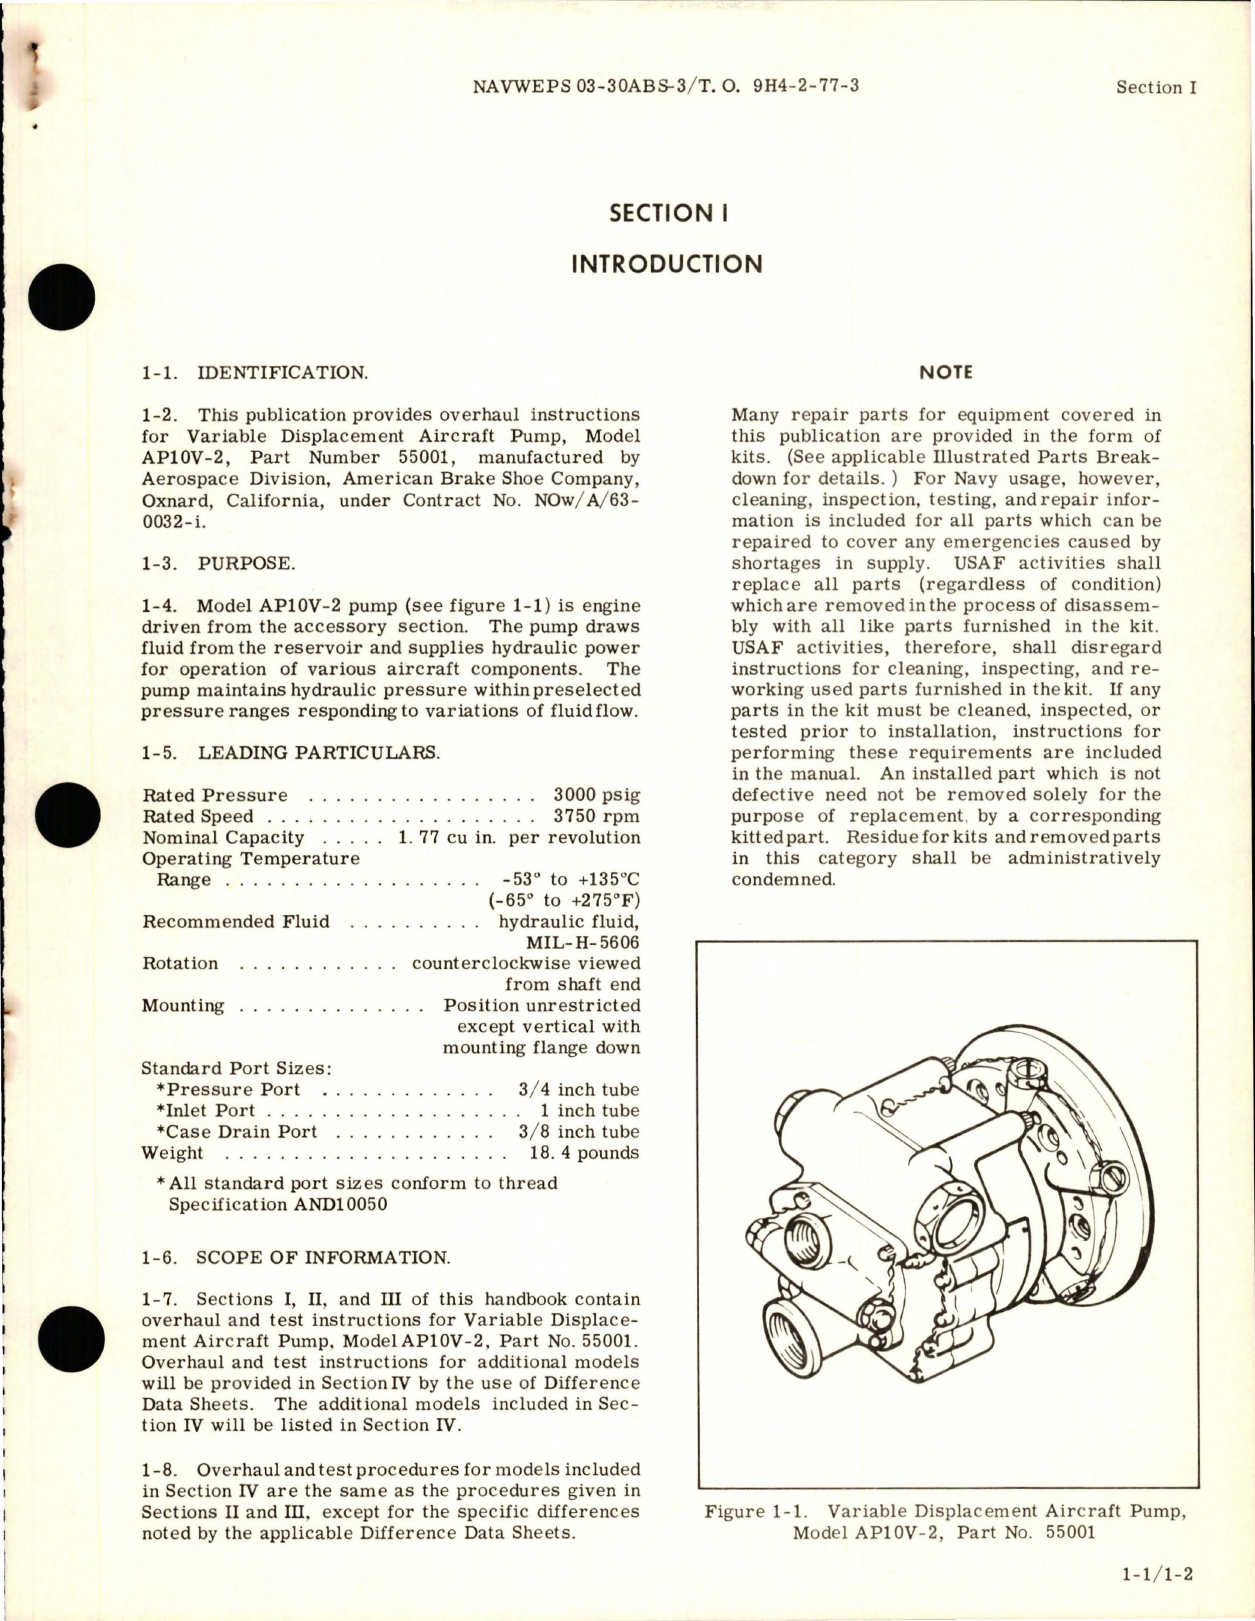 Sample page 5 from AirCorps Library document: Overhaul Instructions for Variable Displacement Aircraft Pump - Part 55001 - Model AP10V-2